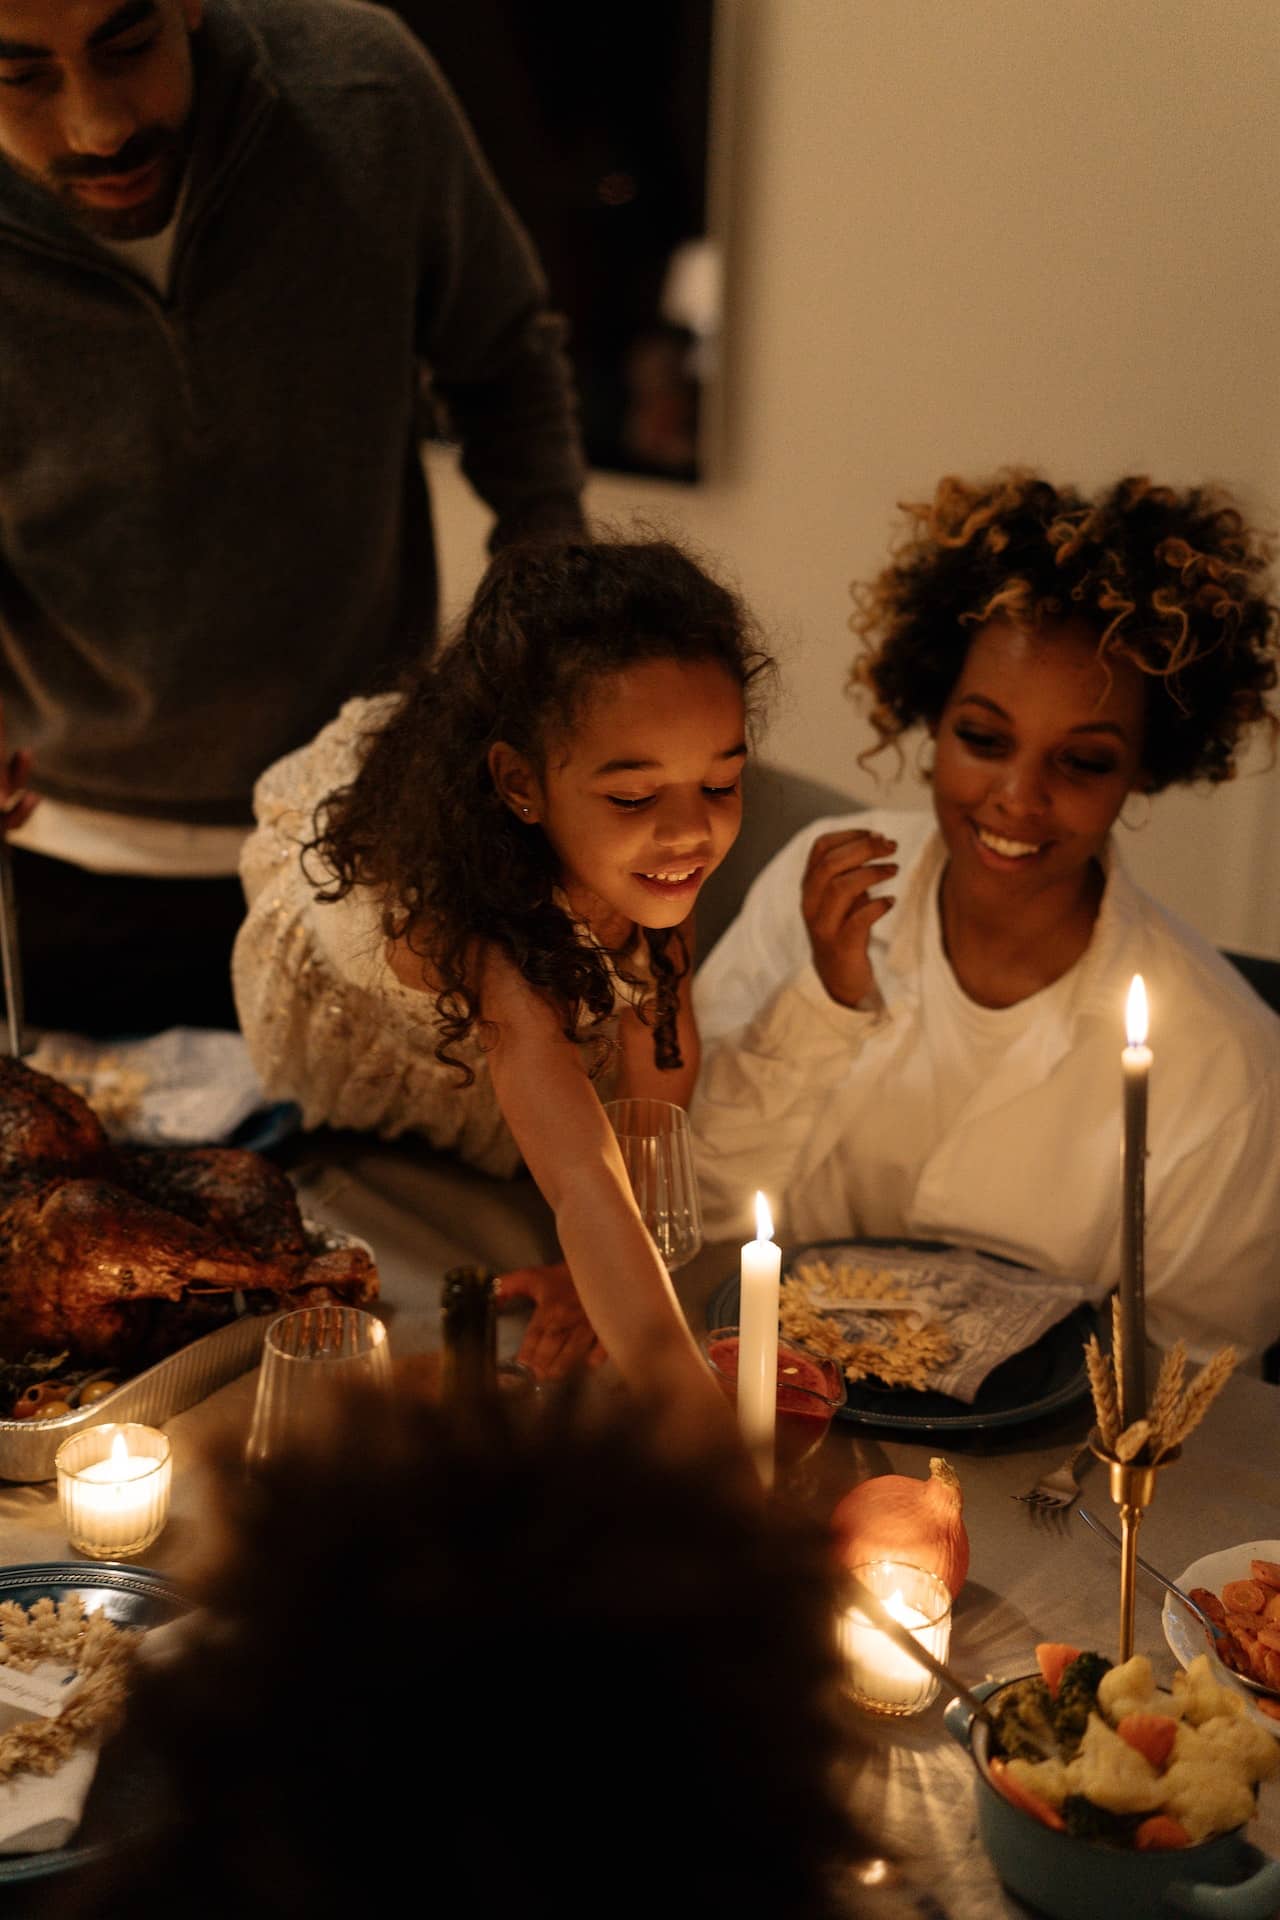 A mother and young daughter at a holiday dinner together, lit by candlelight.